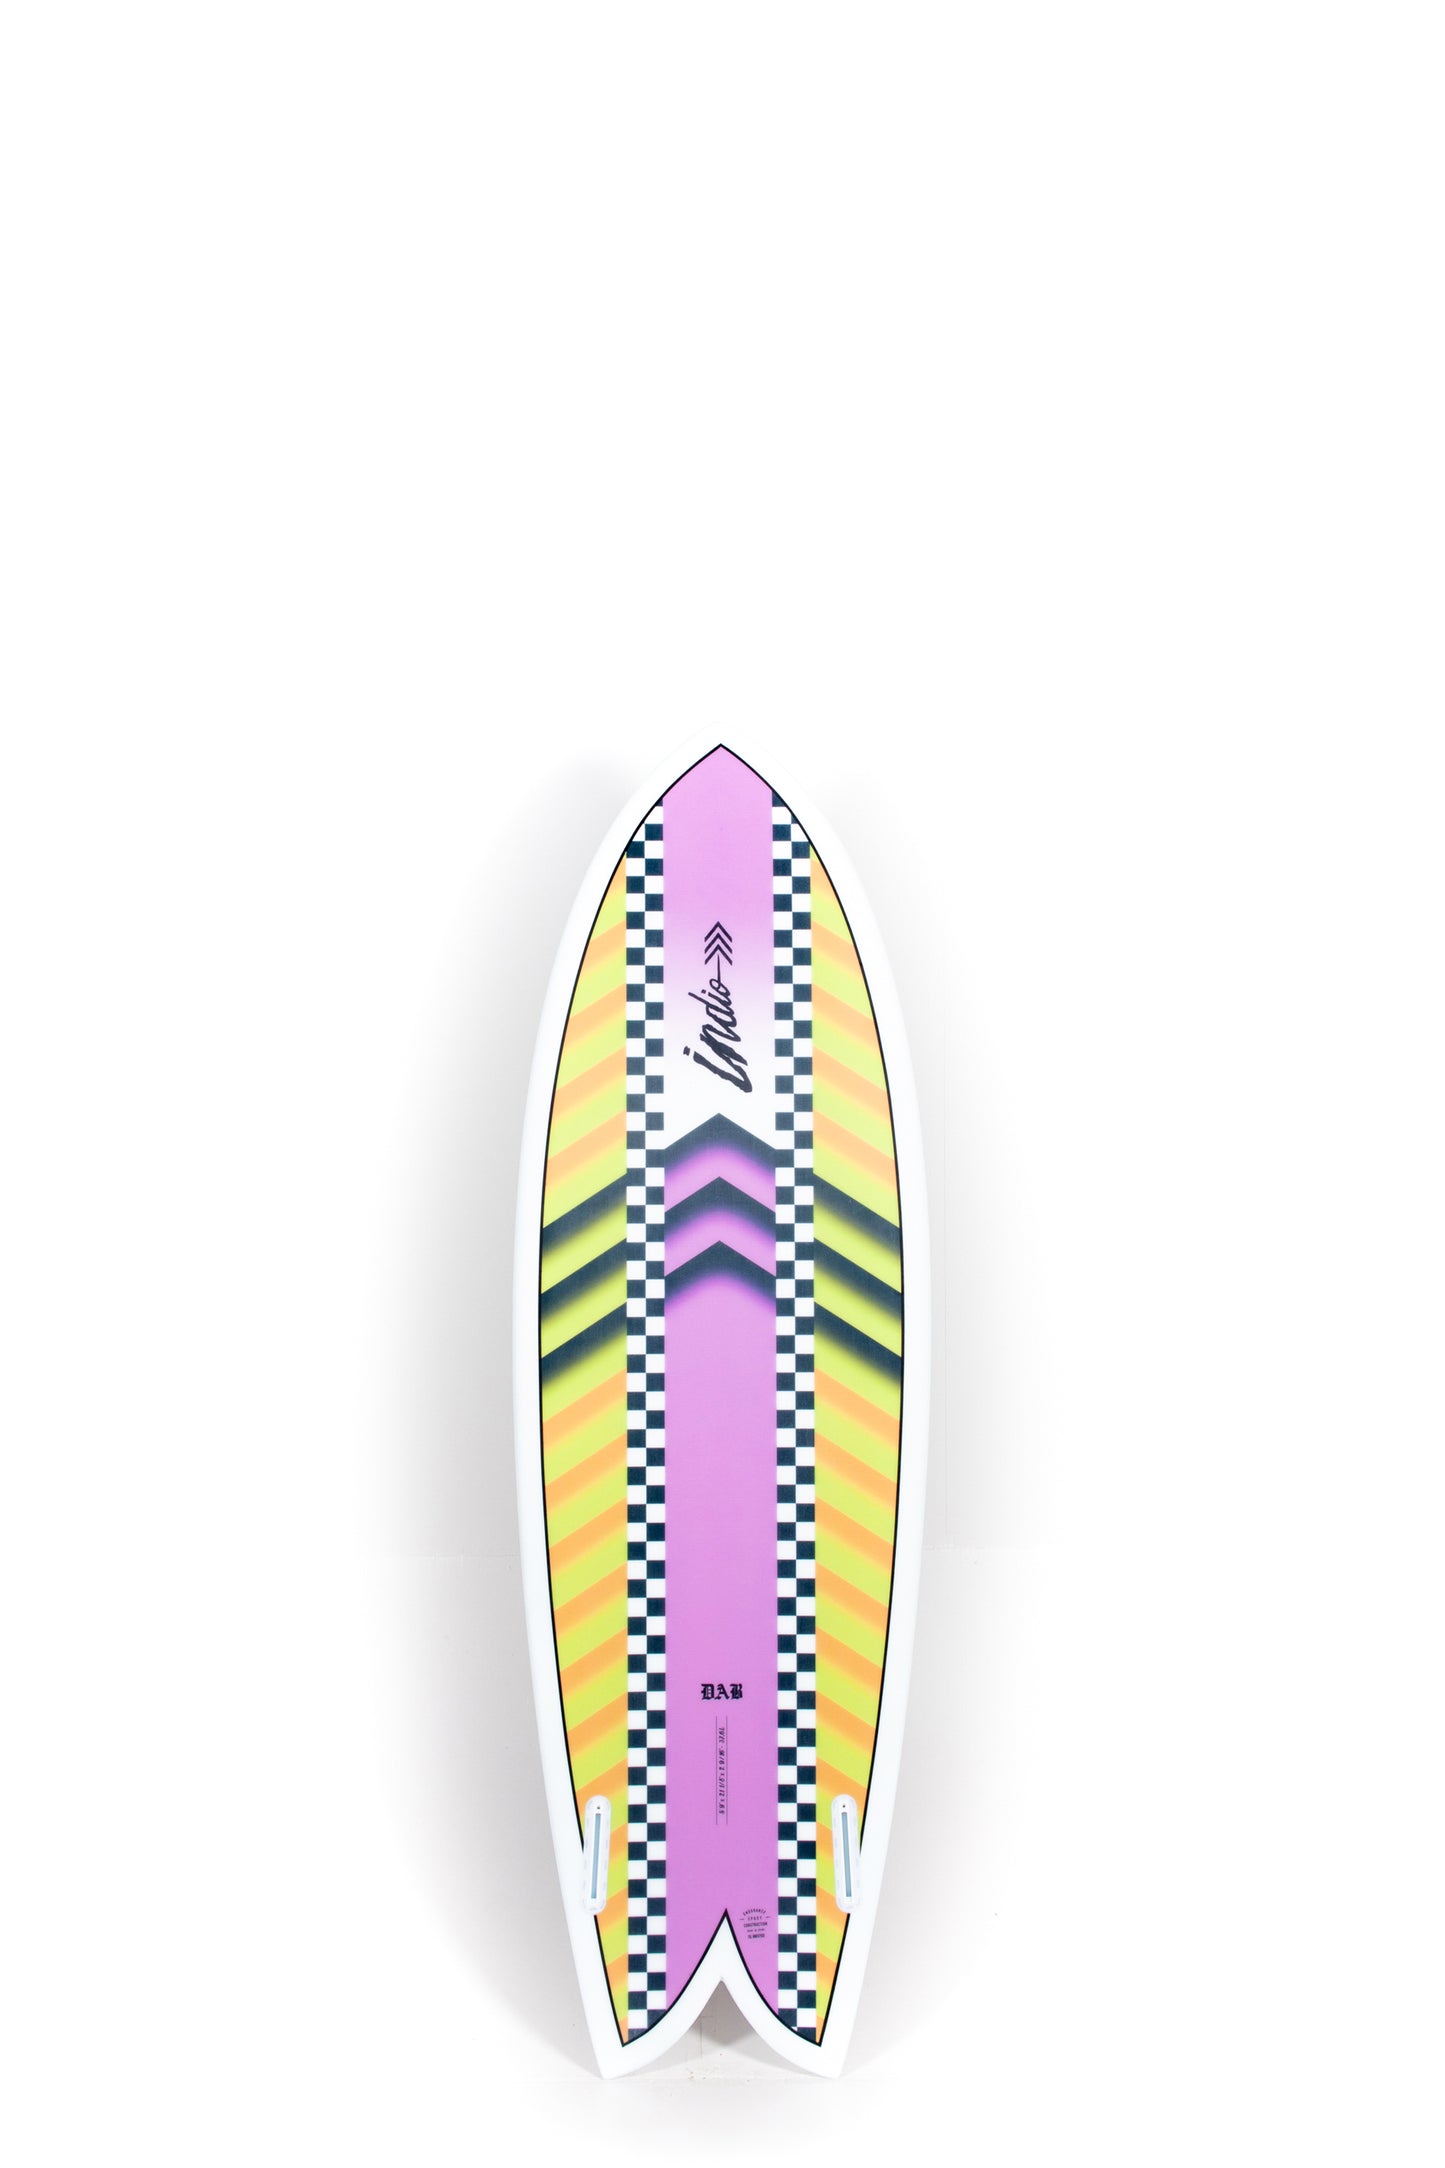 Pukas Surf Shop - Indio Surfboard - Endurance - DAB From the 80´s - 5’7” x 21 x 2 1/2 x 35.8L.